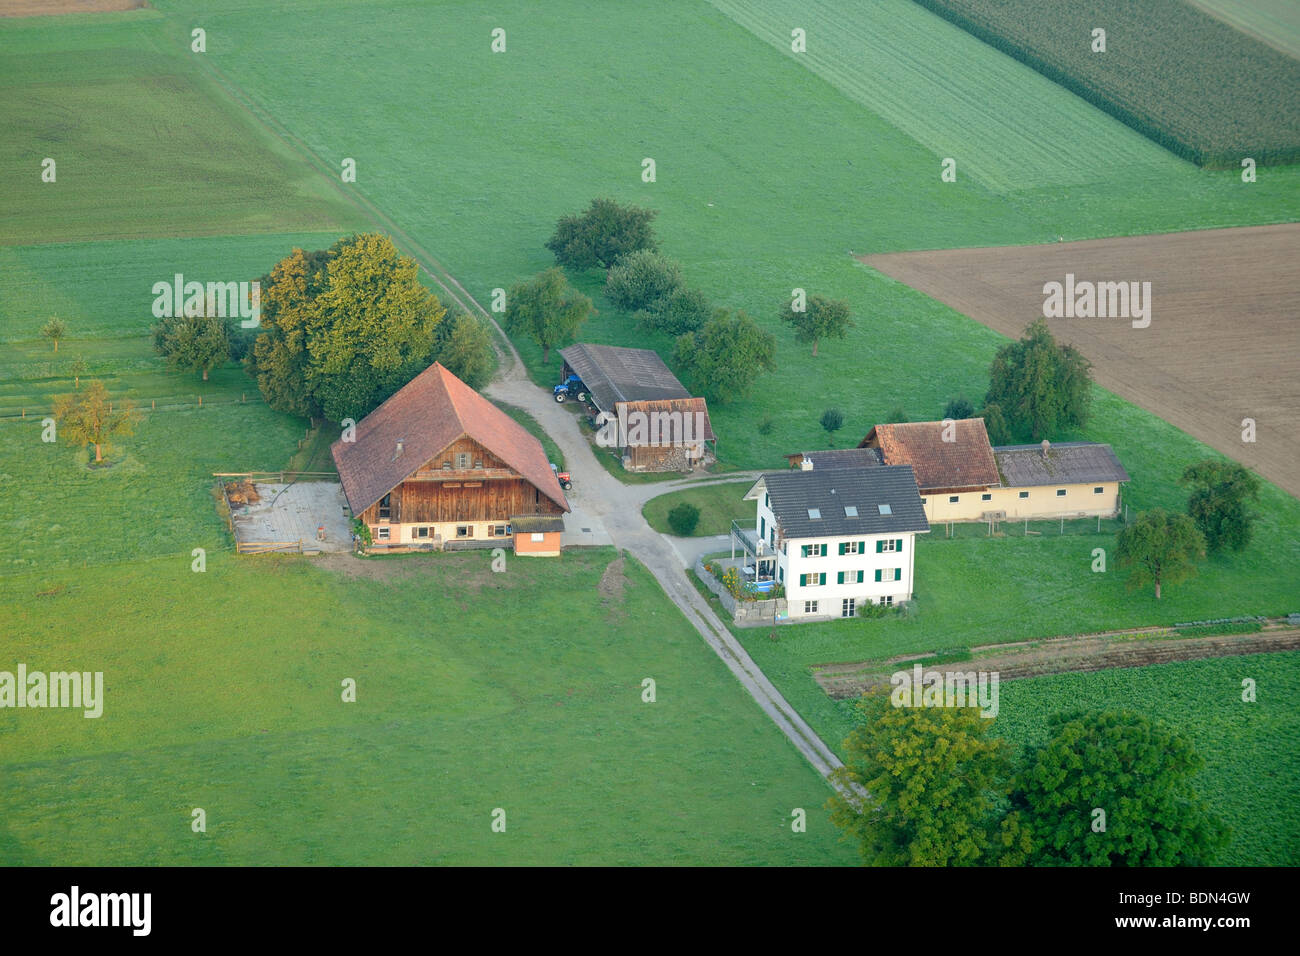 A typical Swiss farm from above, Buttisholz, Switzerland, Europe Stock Photo